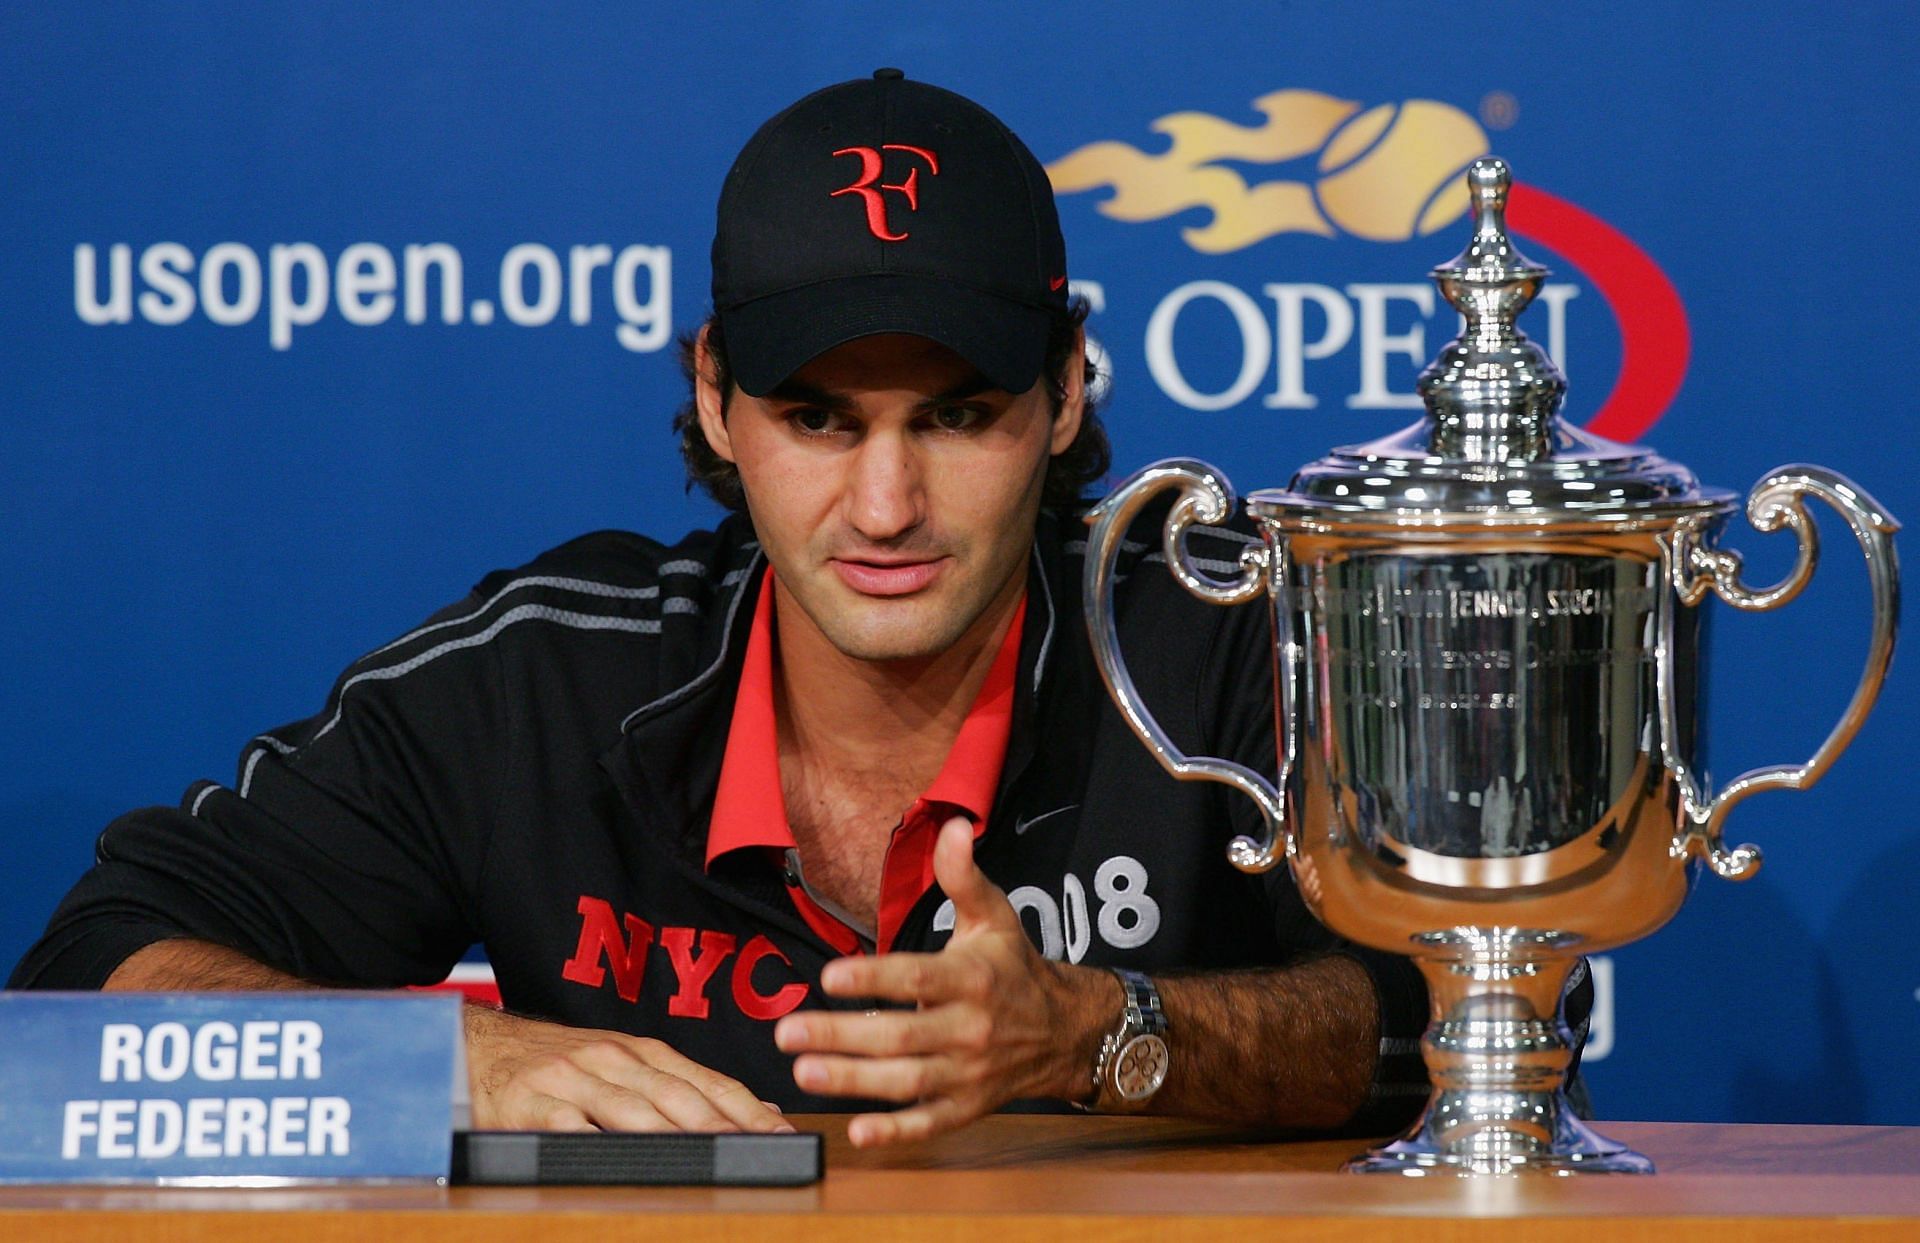 Roger Federer won his fifth consecutive US Open title in 2008.